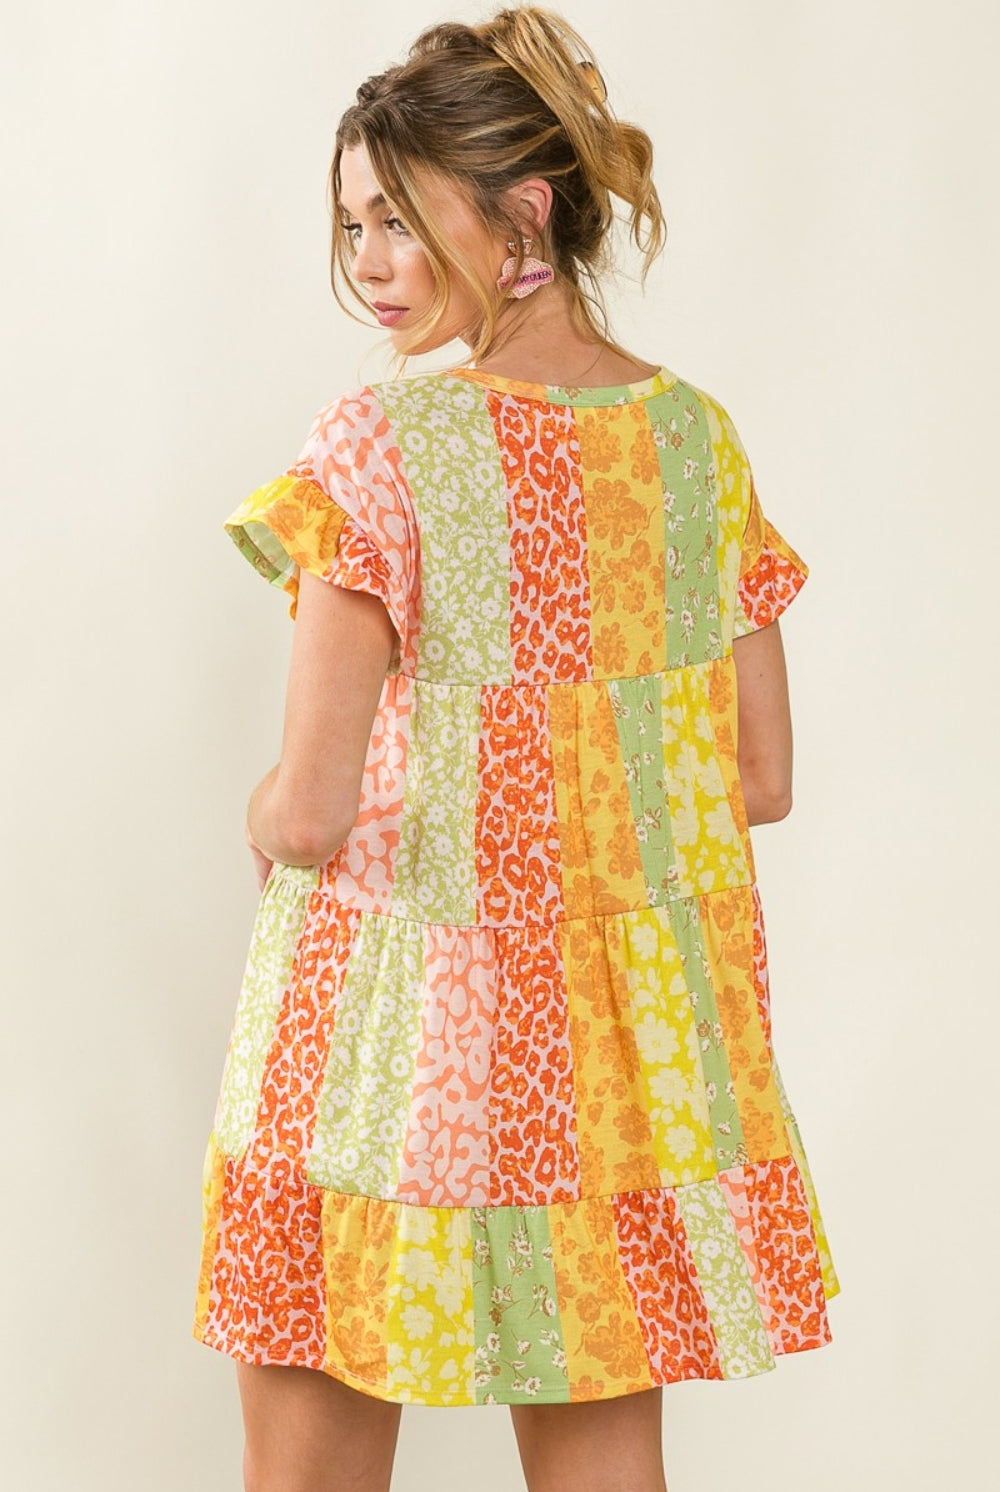 Chic individual in a vibrant patchwork swing dress with summer-inspired color palette and patterns.